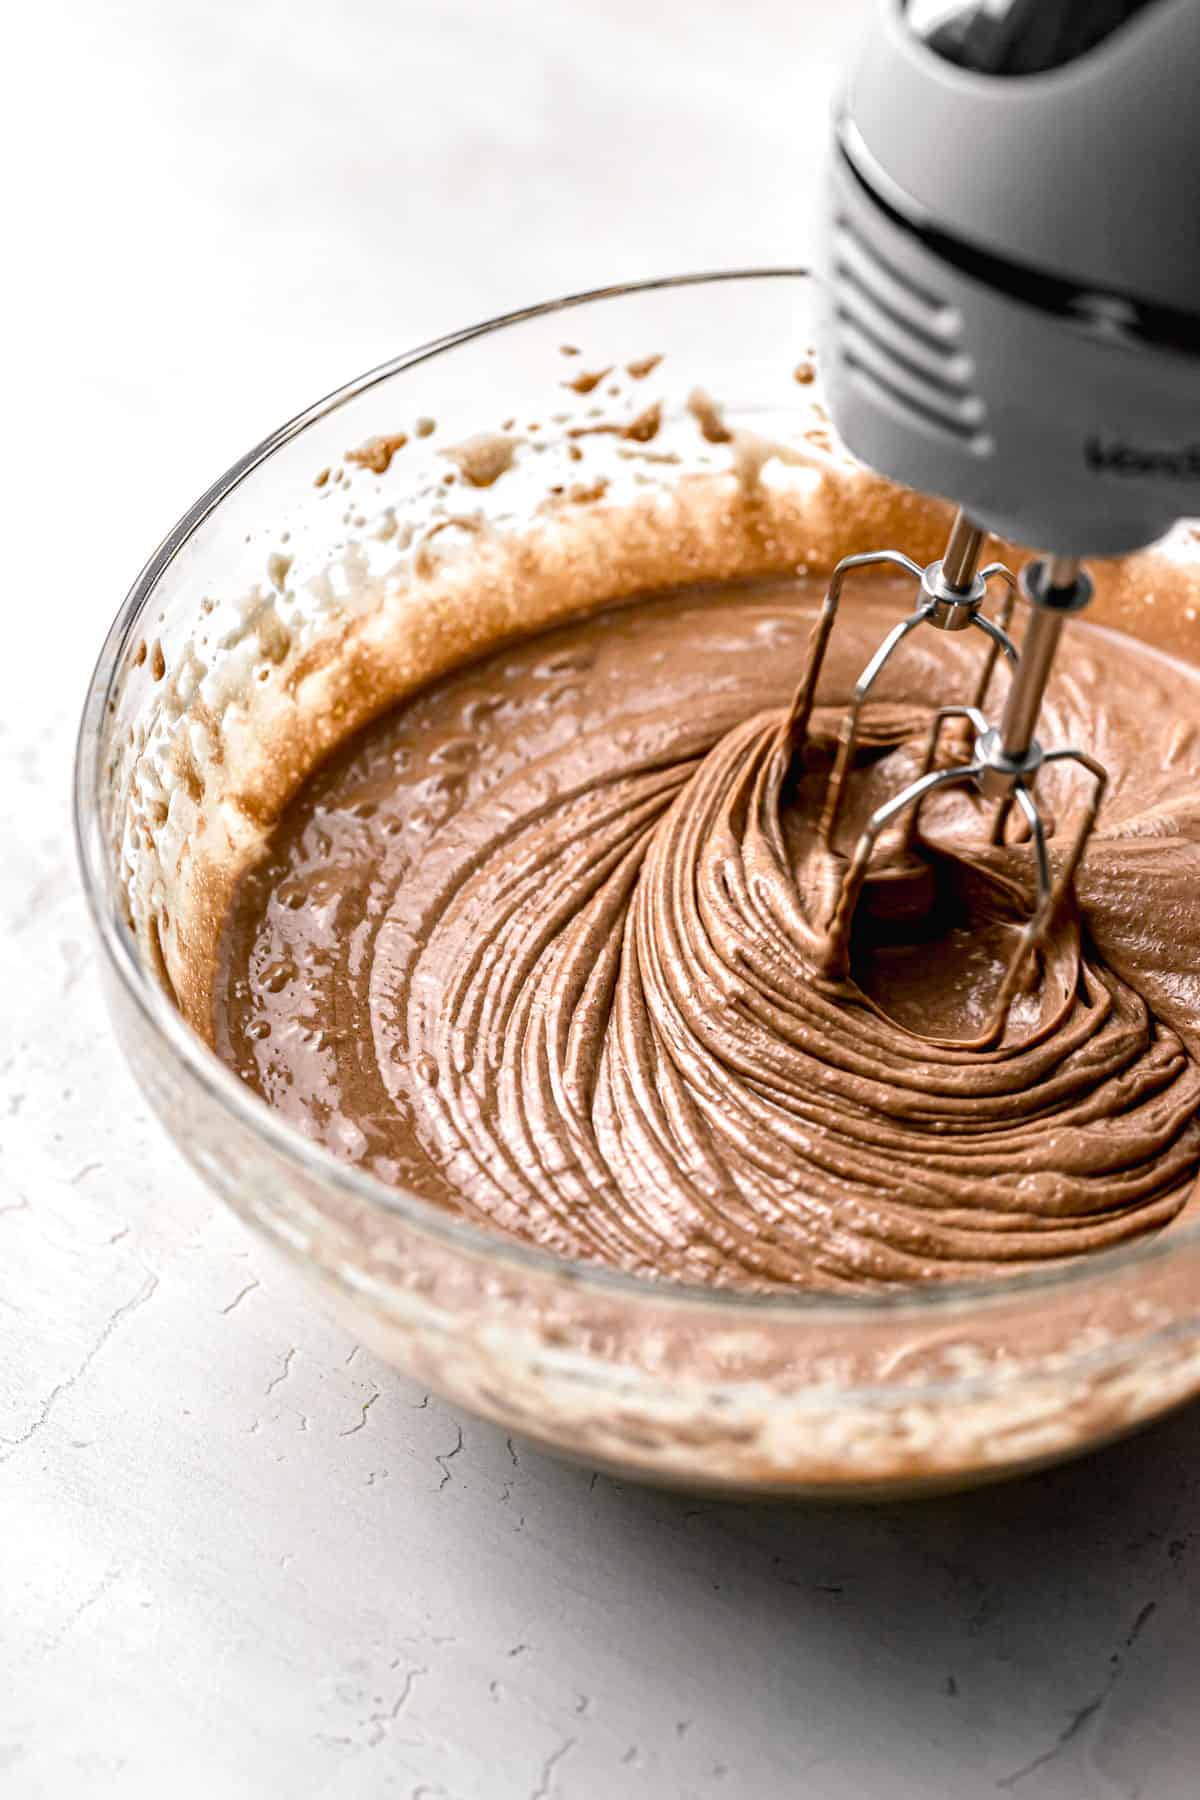 melted chocolate being mixed into batter.